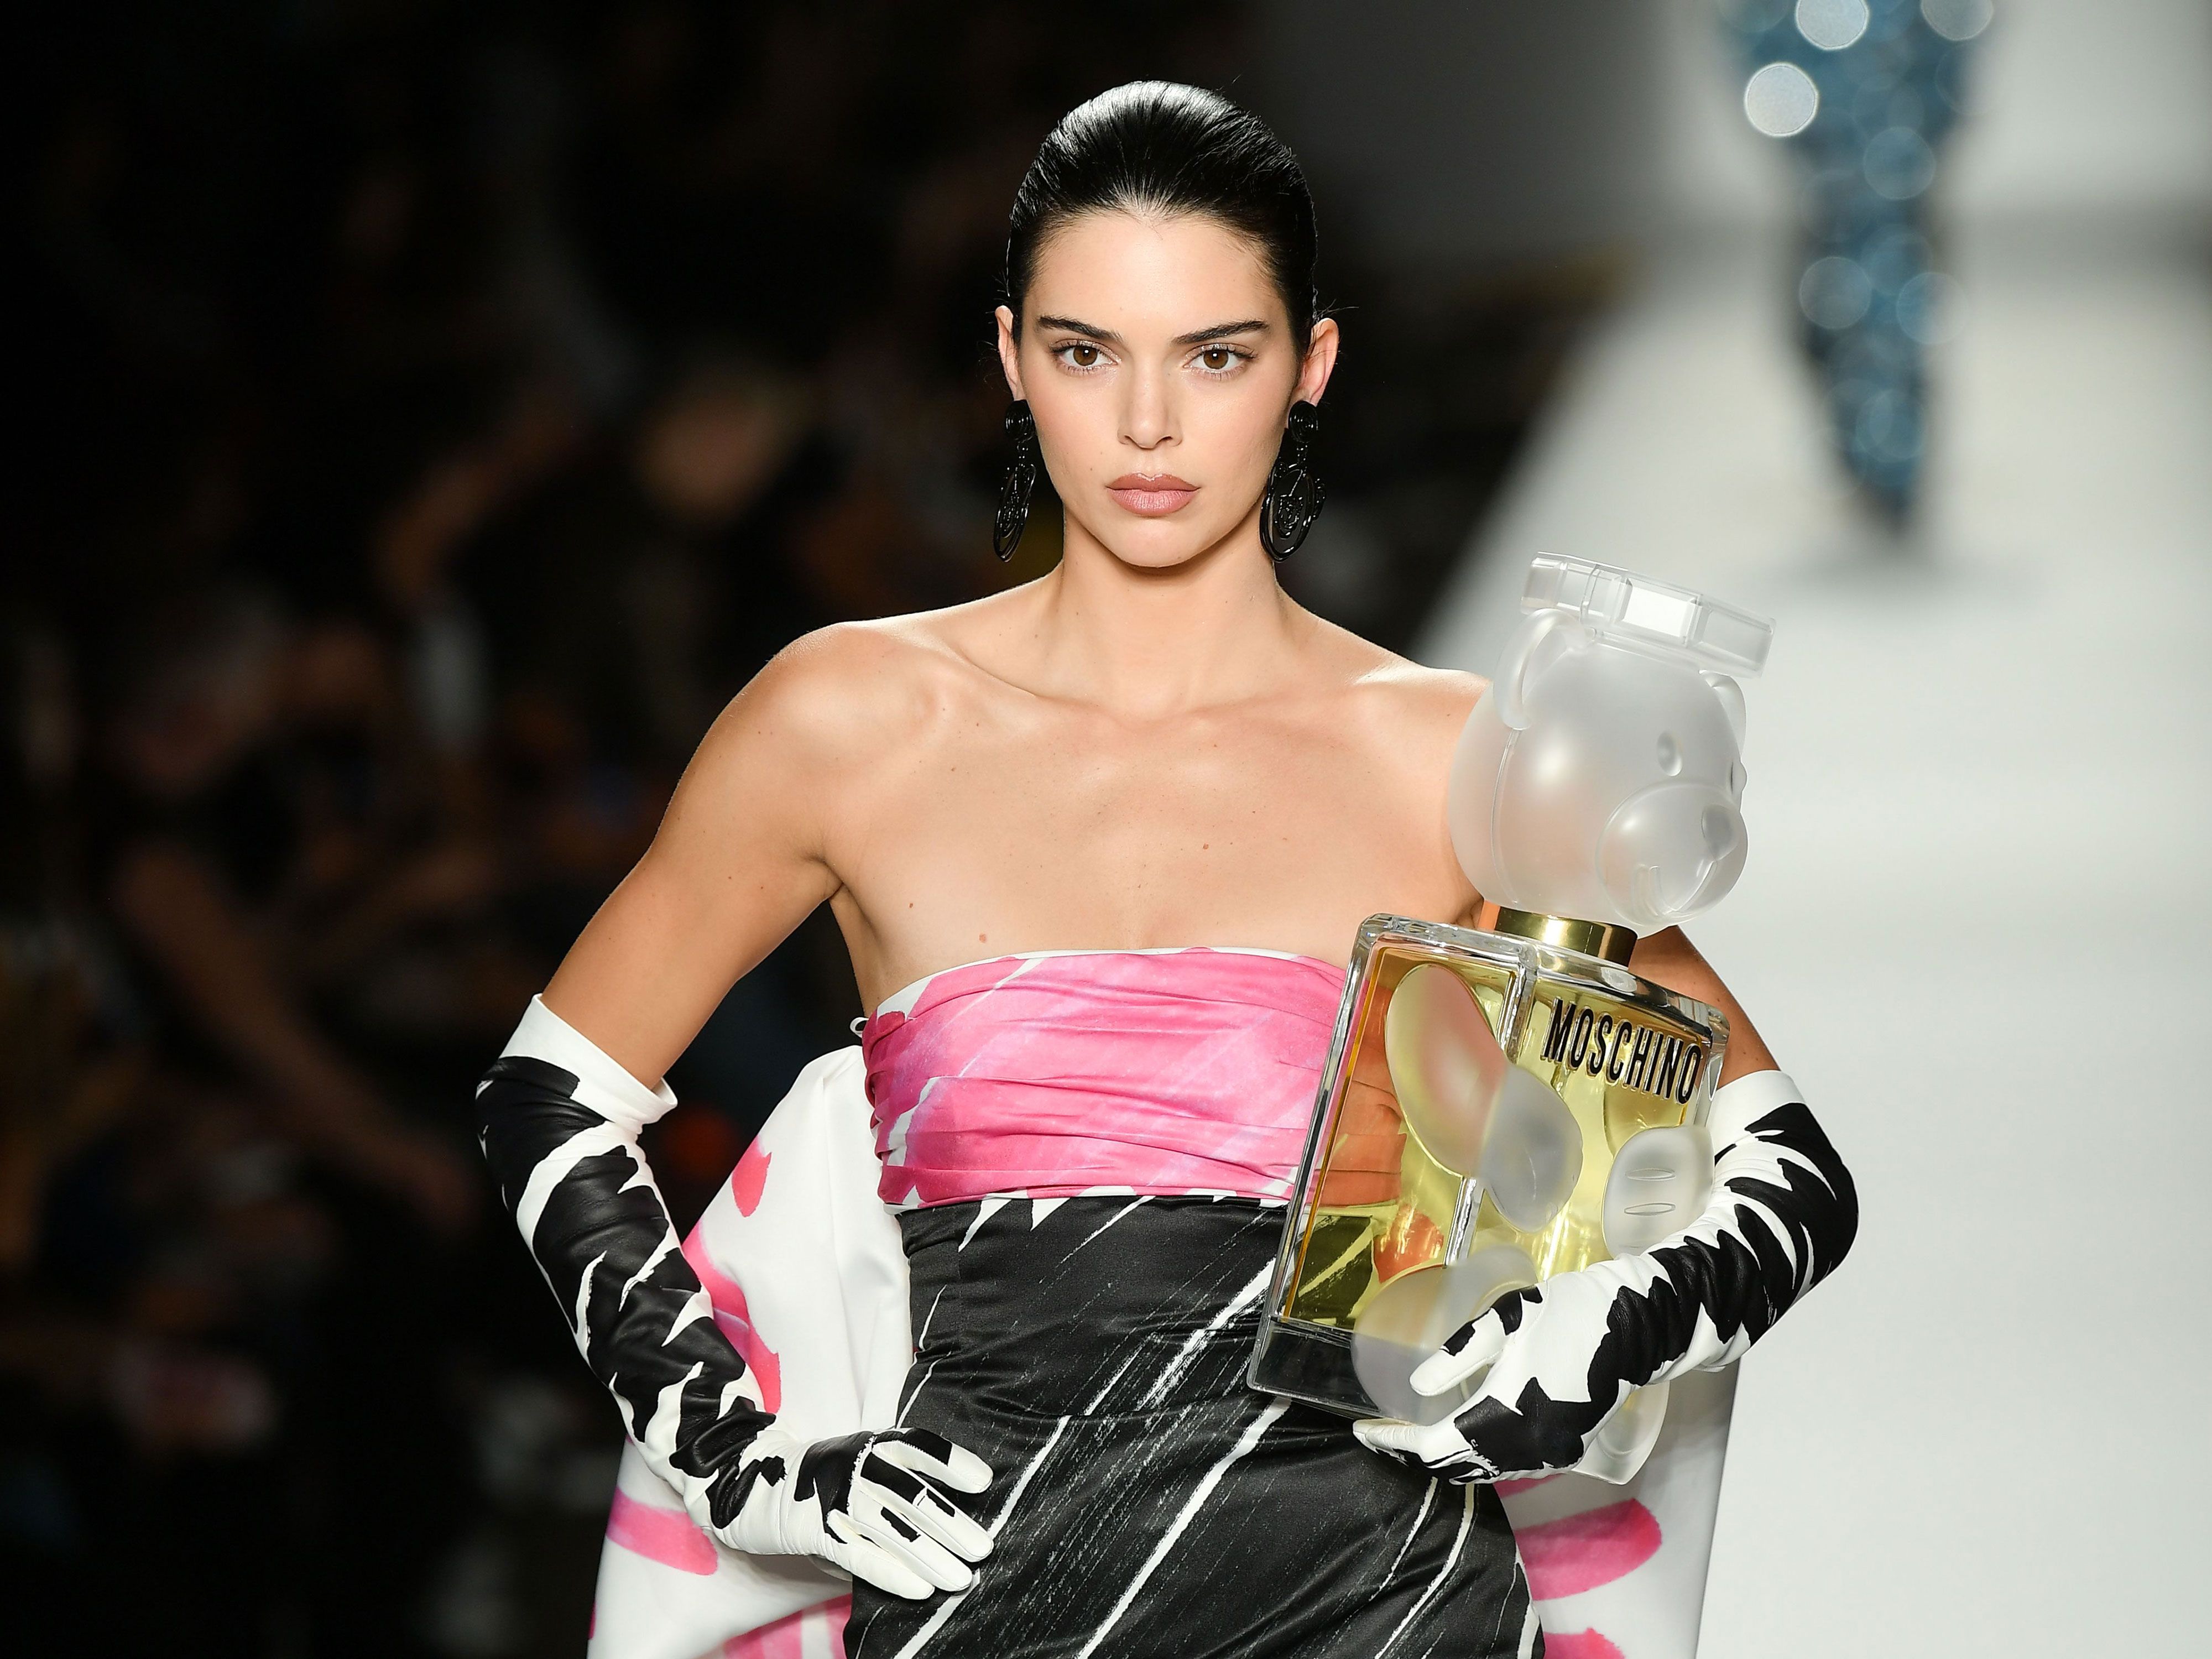 Moschino denies copying the work of an emerging designer